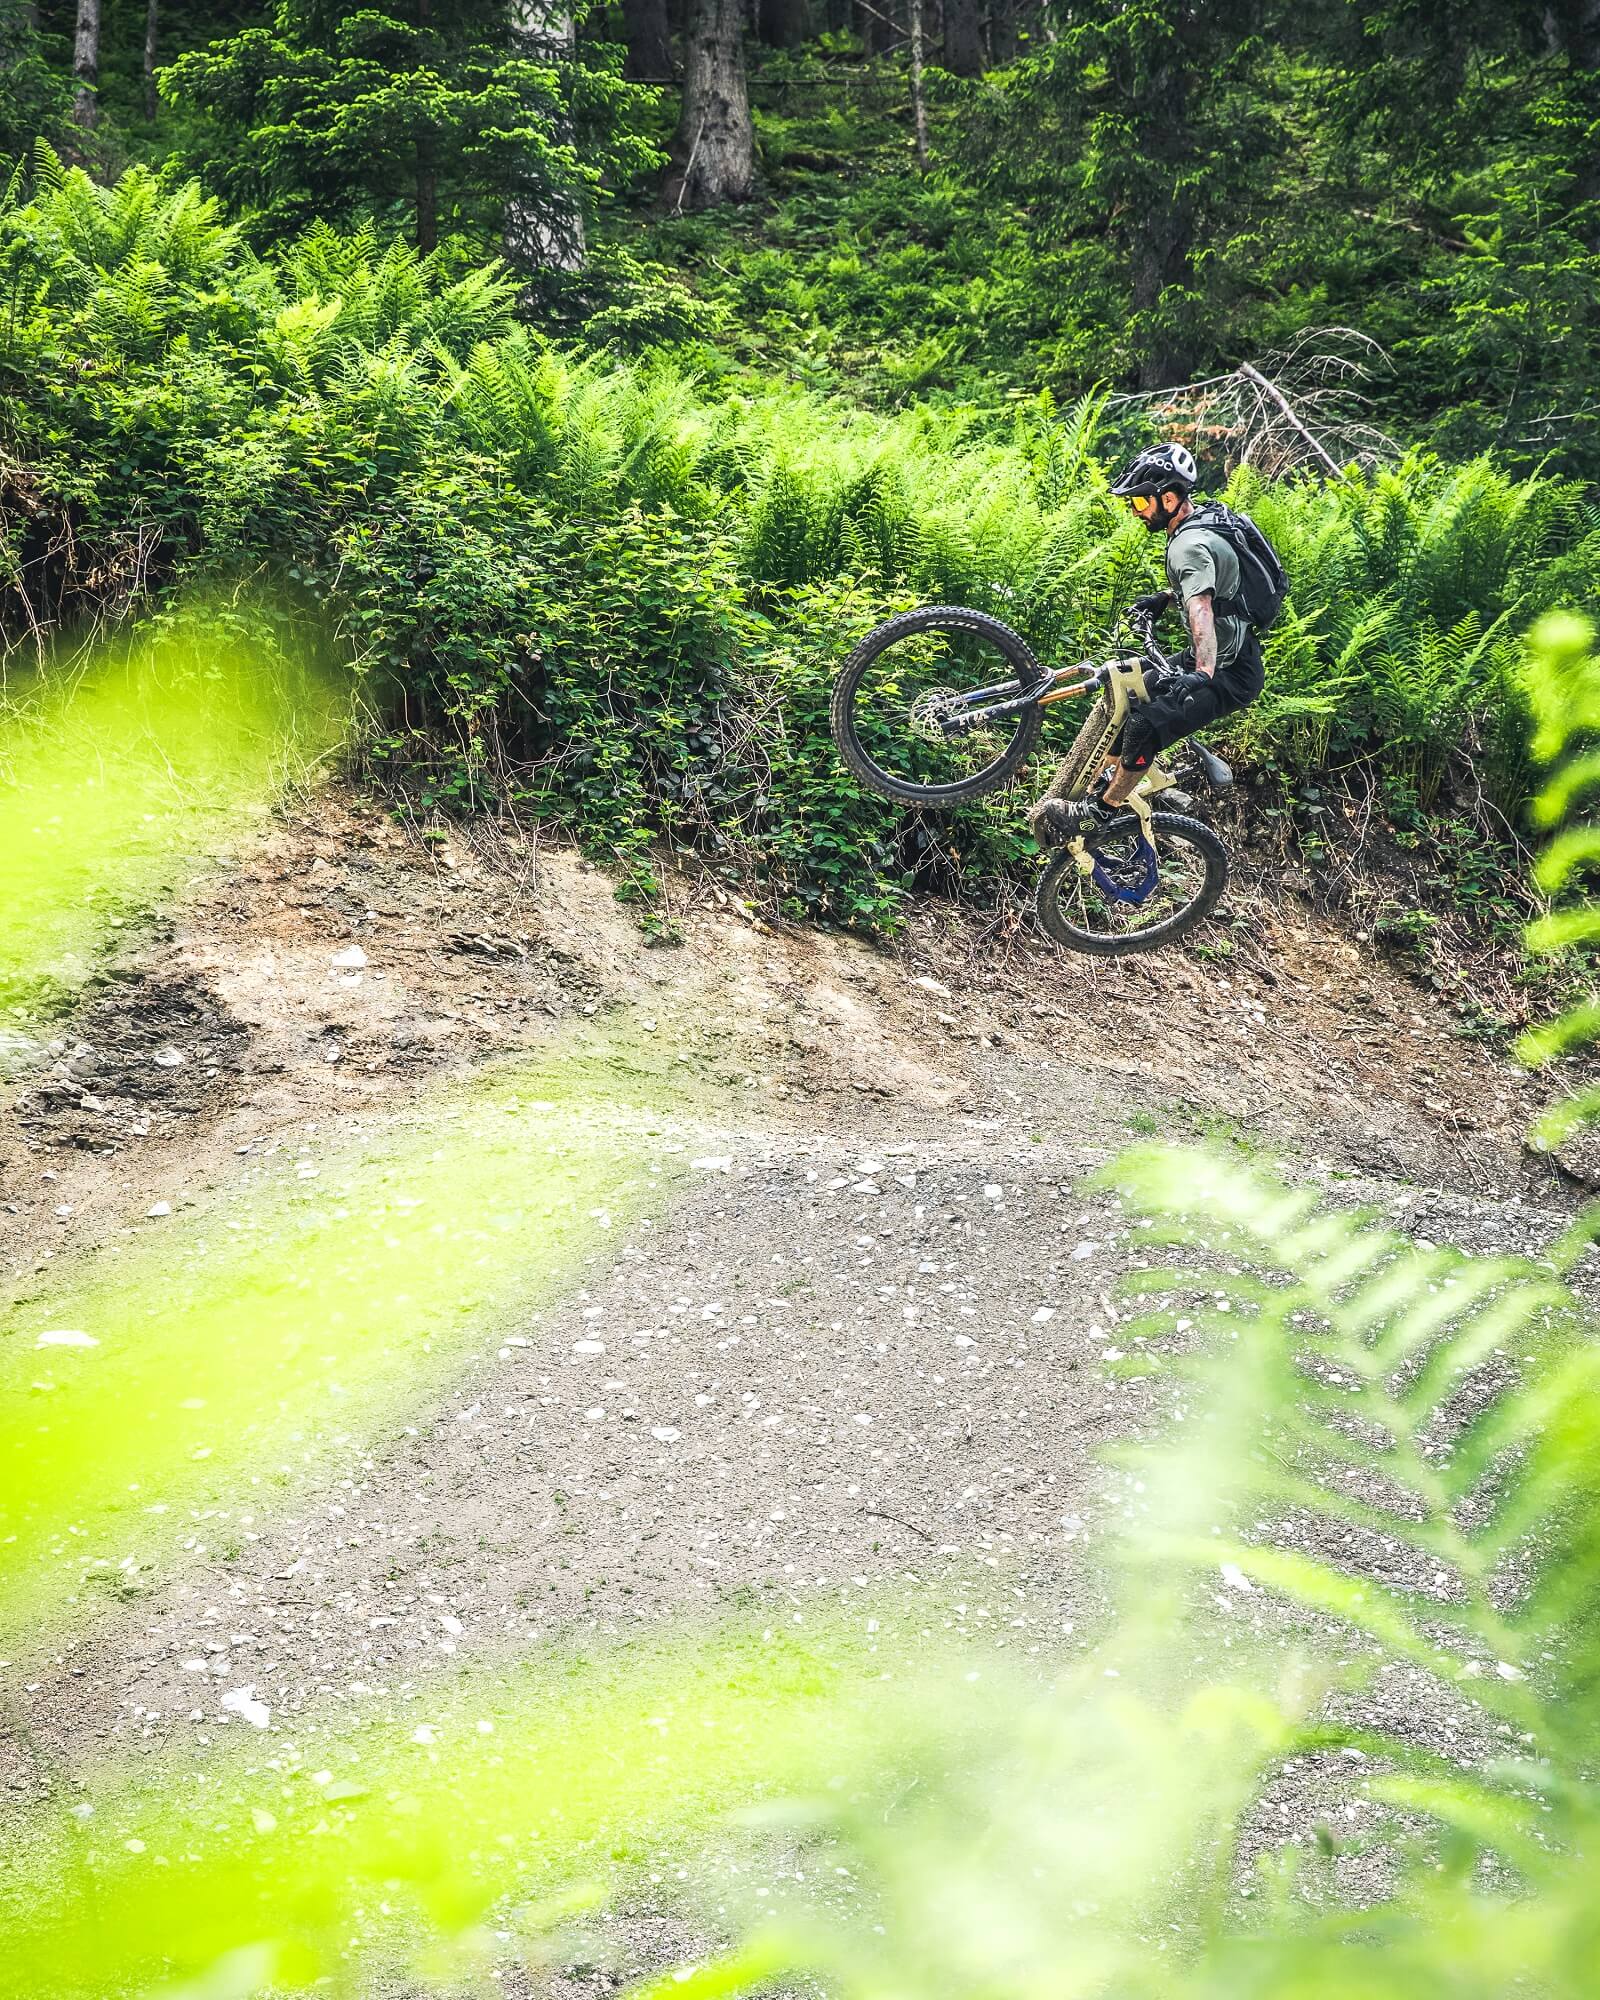 Haibike Hero Andrea Garibbo jumping with his bike in a forest